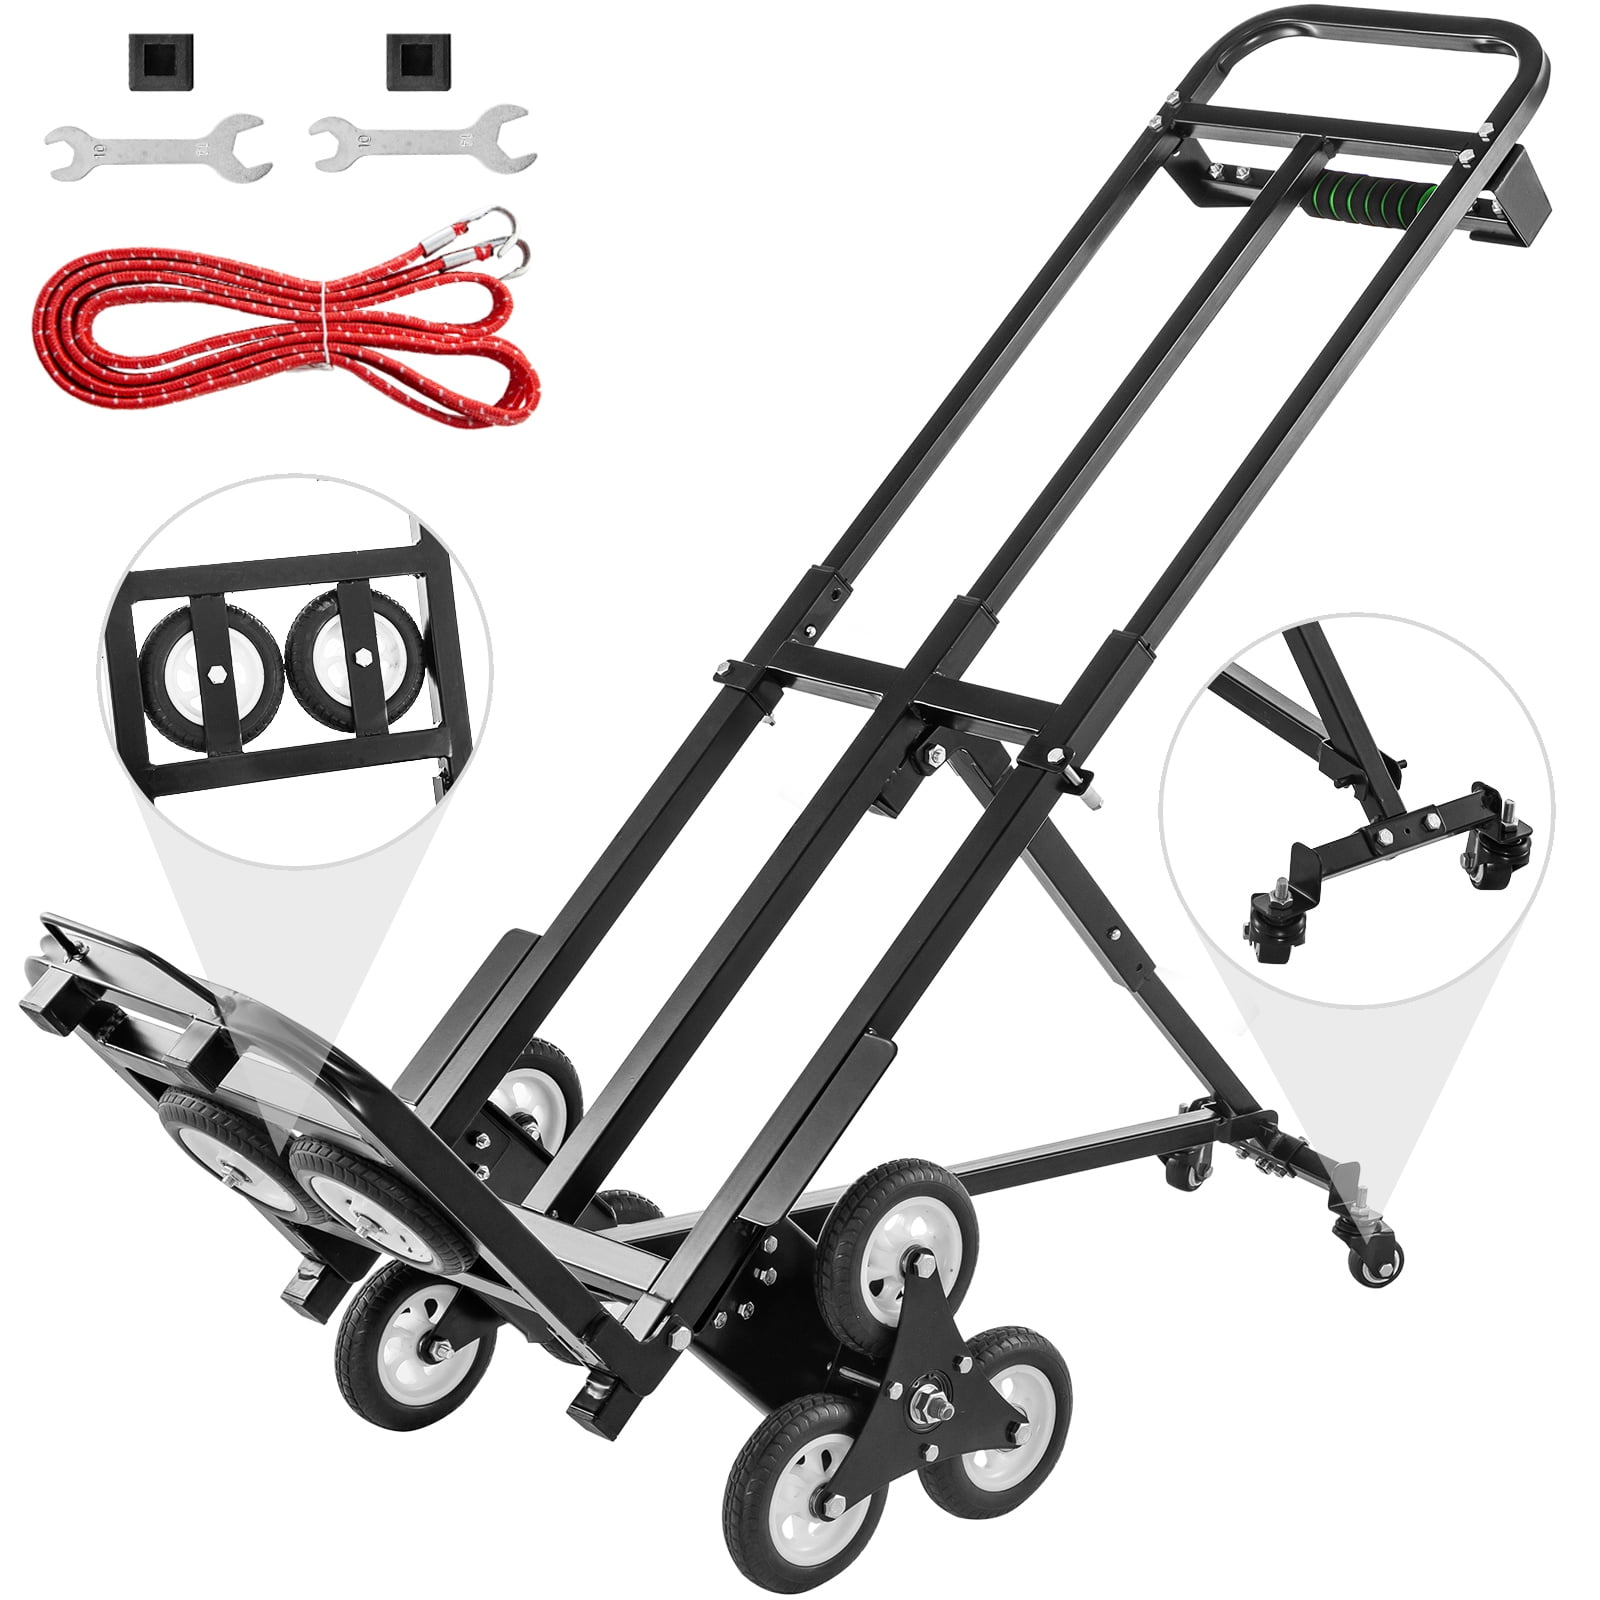 Heavy Duty with 6 Wheels Portable Folding Trolley for Upstairs Cargo Transportation Solid Rubber Tires-330 lbs Barrow Hand Truck Yosoo Health Gear Stair Climber Hand Truck